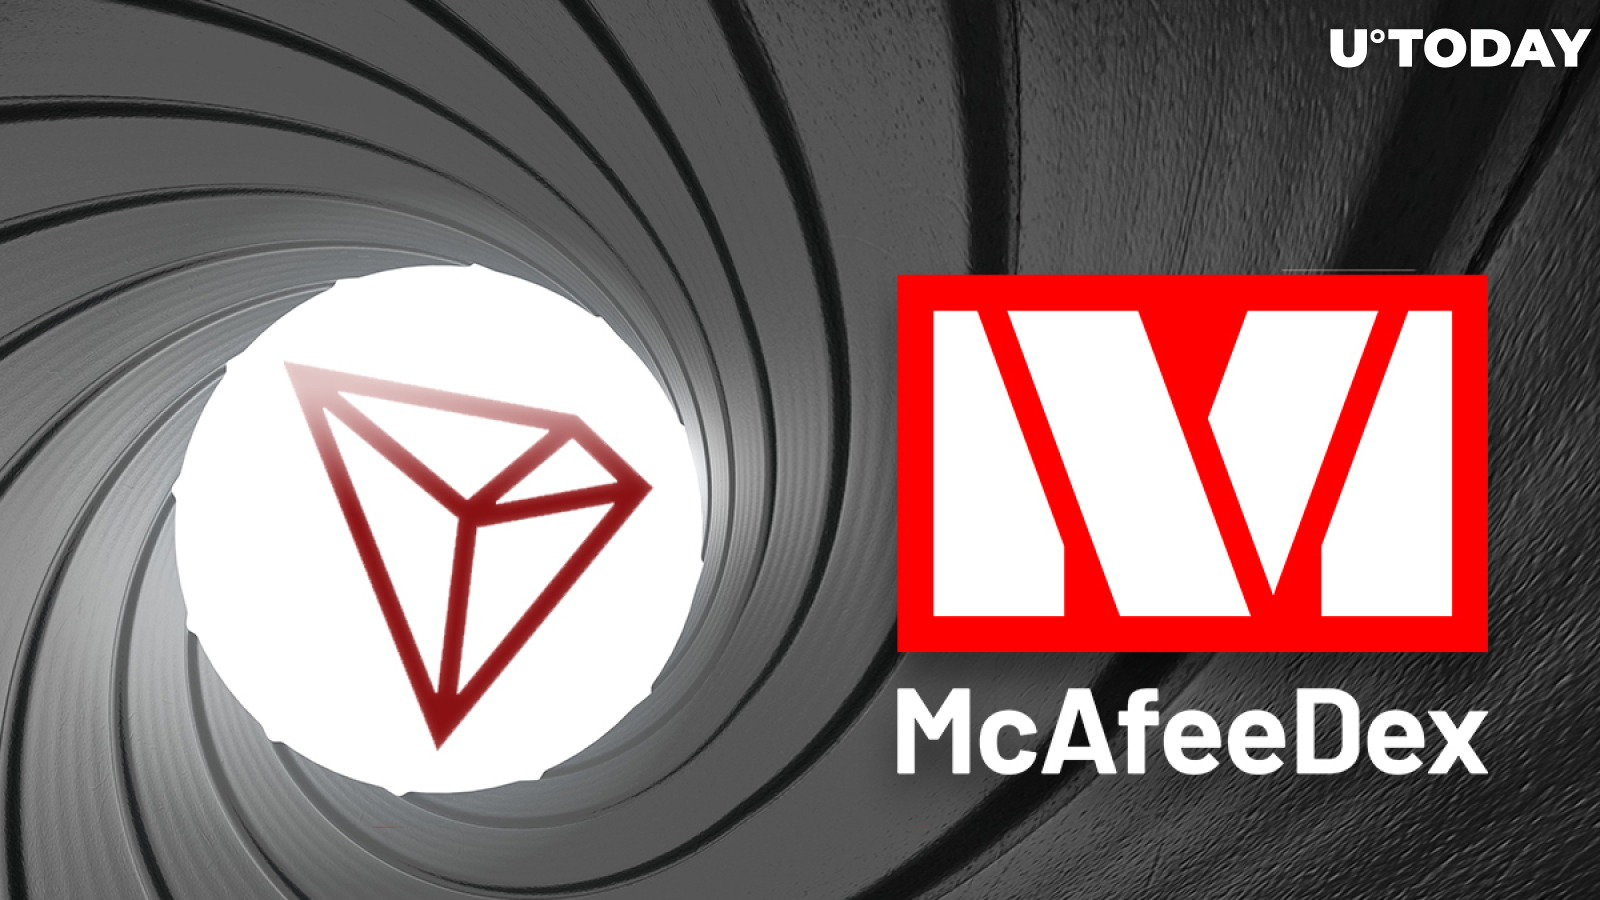 Tron (TRX) Goes Live on McAfeeDEX after Week’s Delay